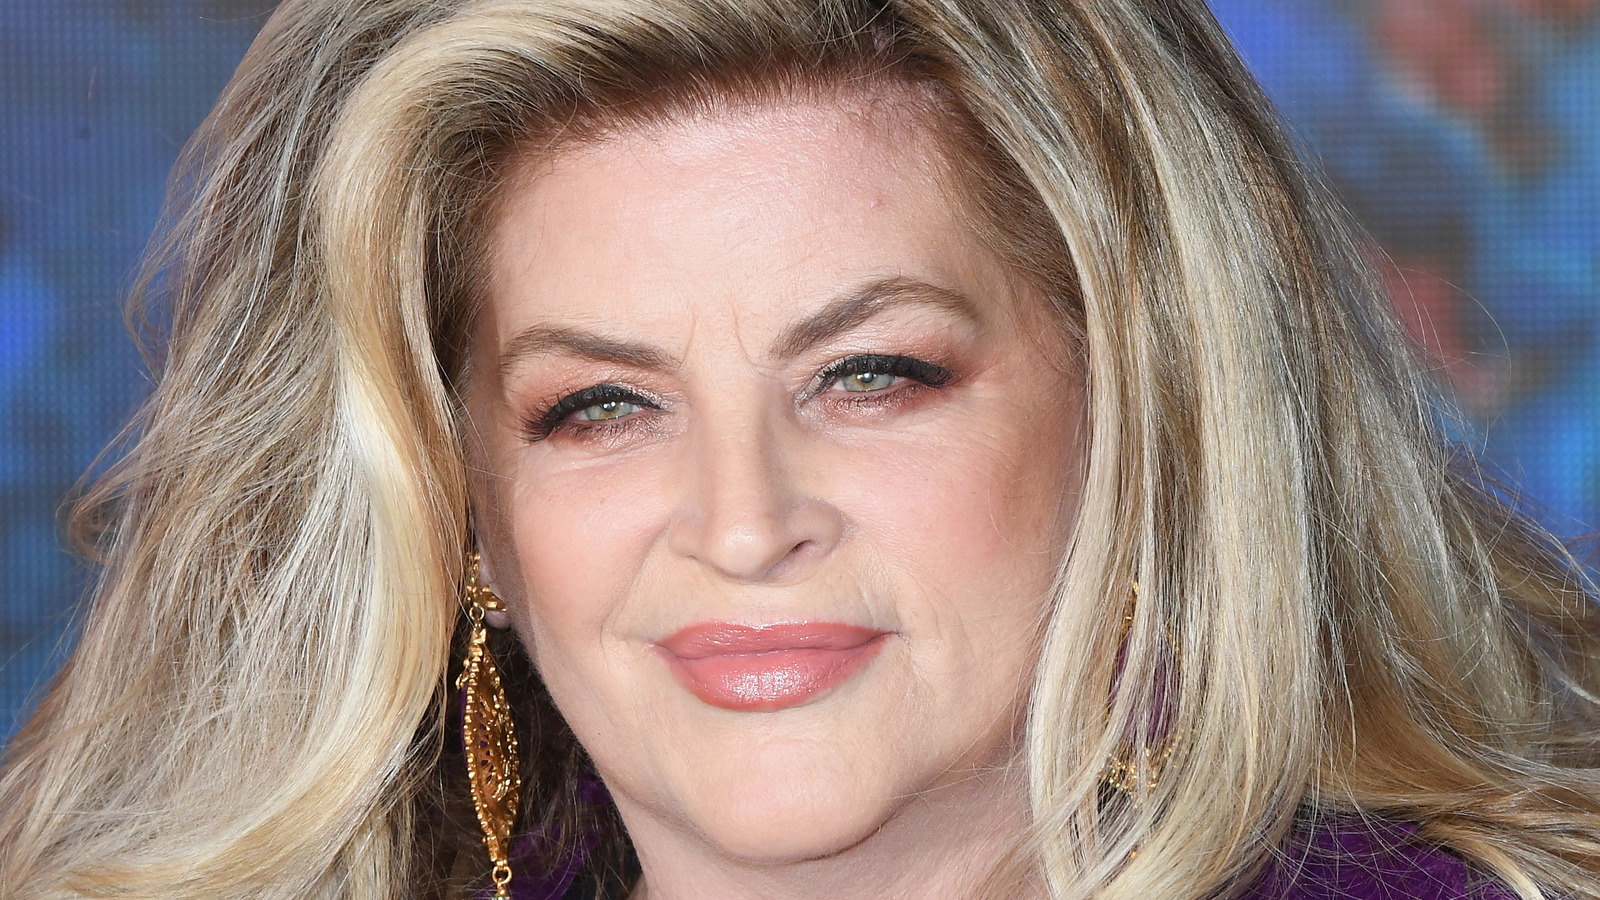 Here's What Kirstie Alley's Net Worth Really Is